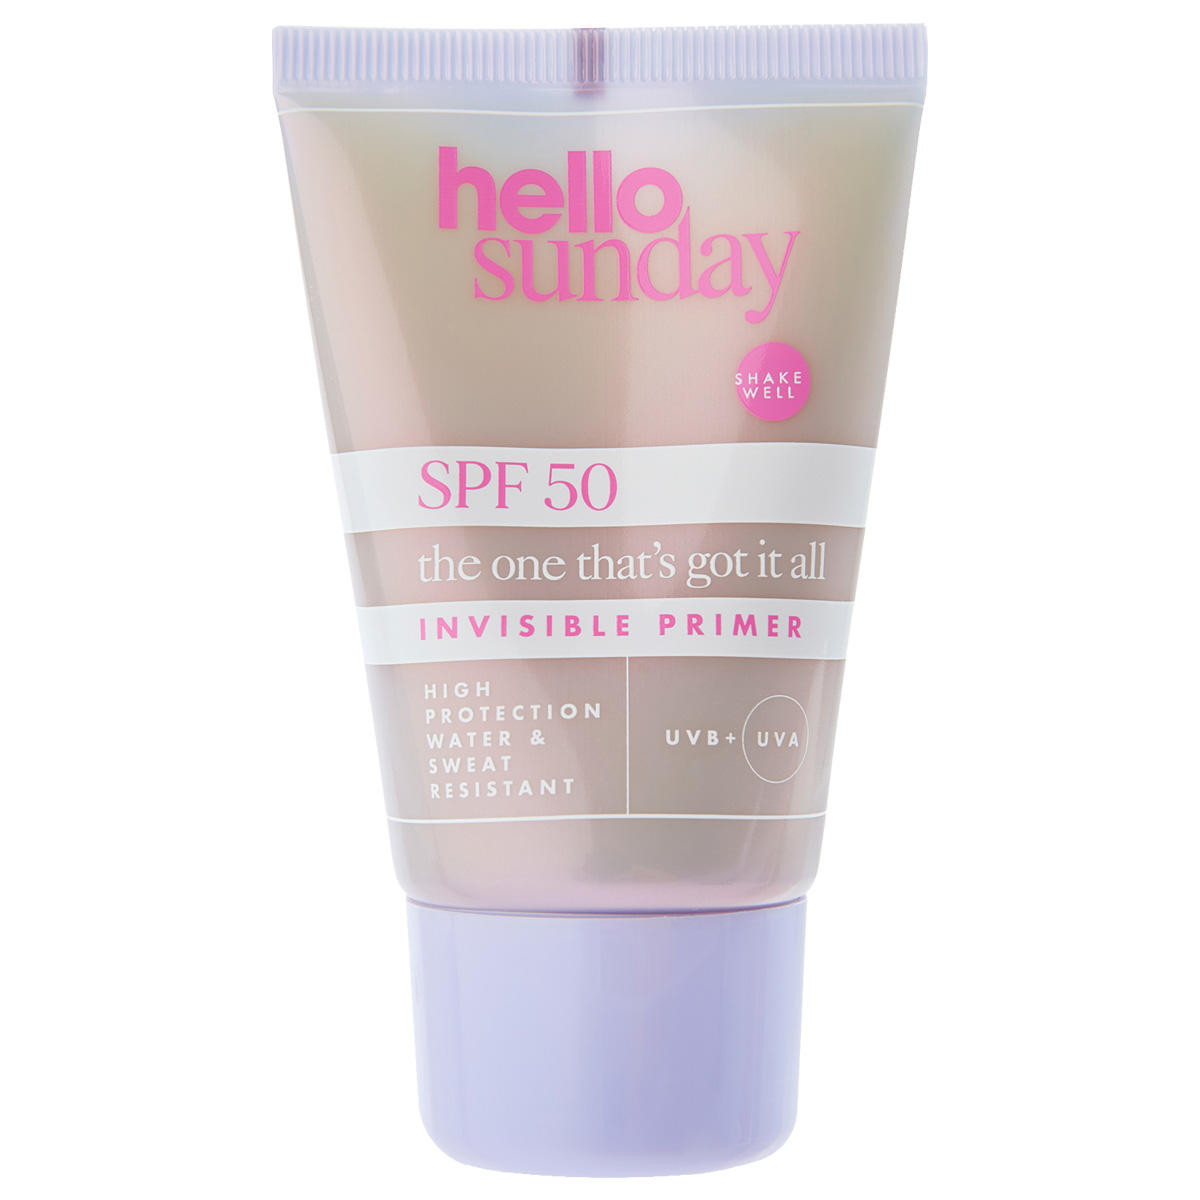 hello sunday the one that´s got it all Invisible primer SPF 50 50 ml - 1